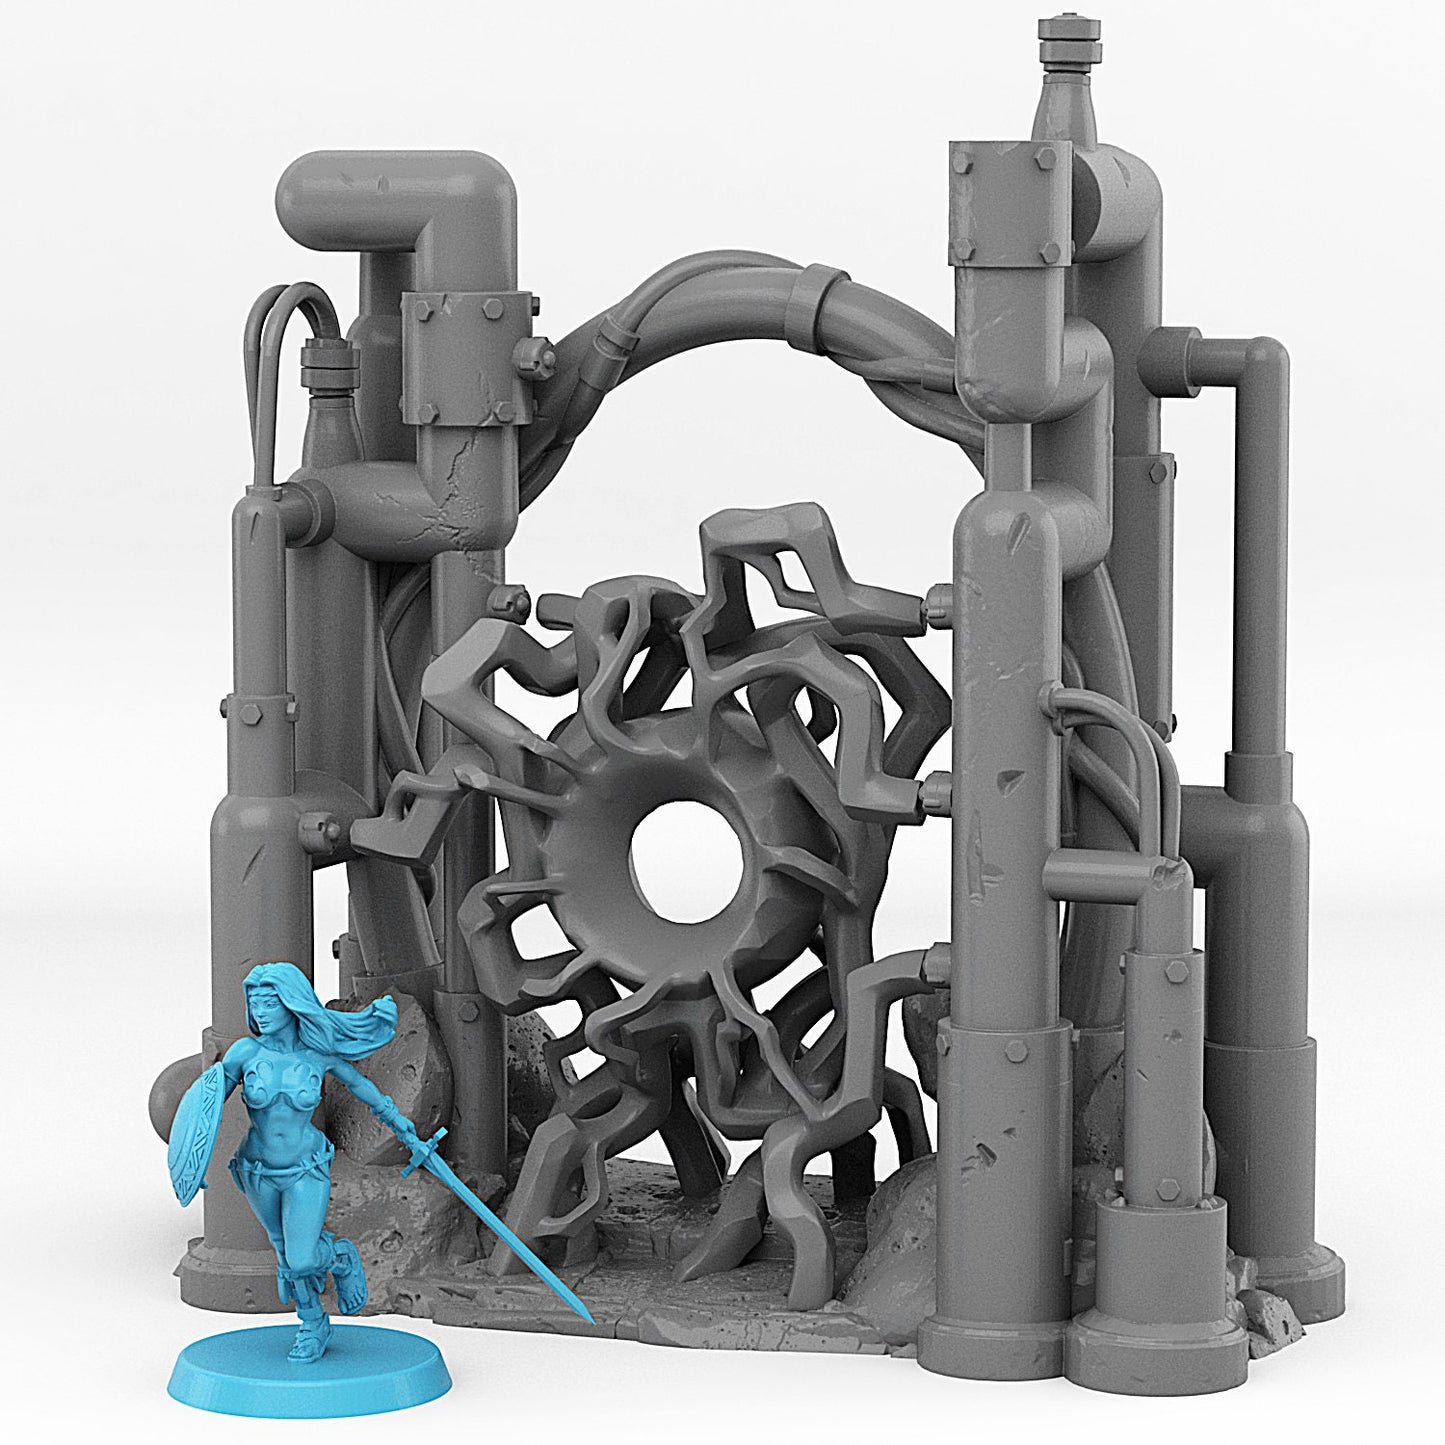 Martian Pipes Portal | Scenery and terrain | 3D Printed Resin Miniature | Tabletop Role Playing | AoS | D&D | 40K | Pathfinder